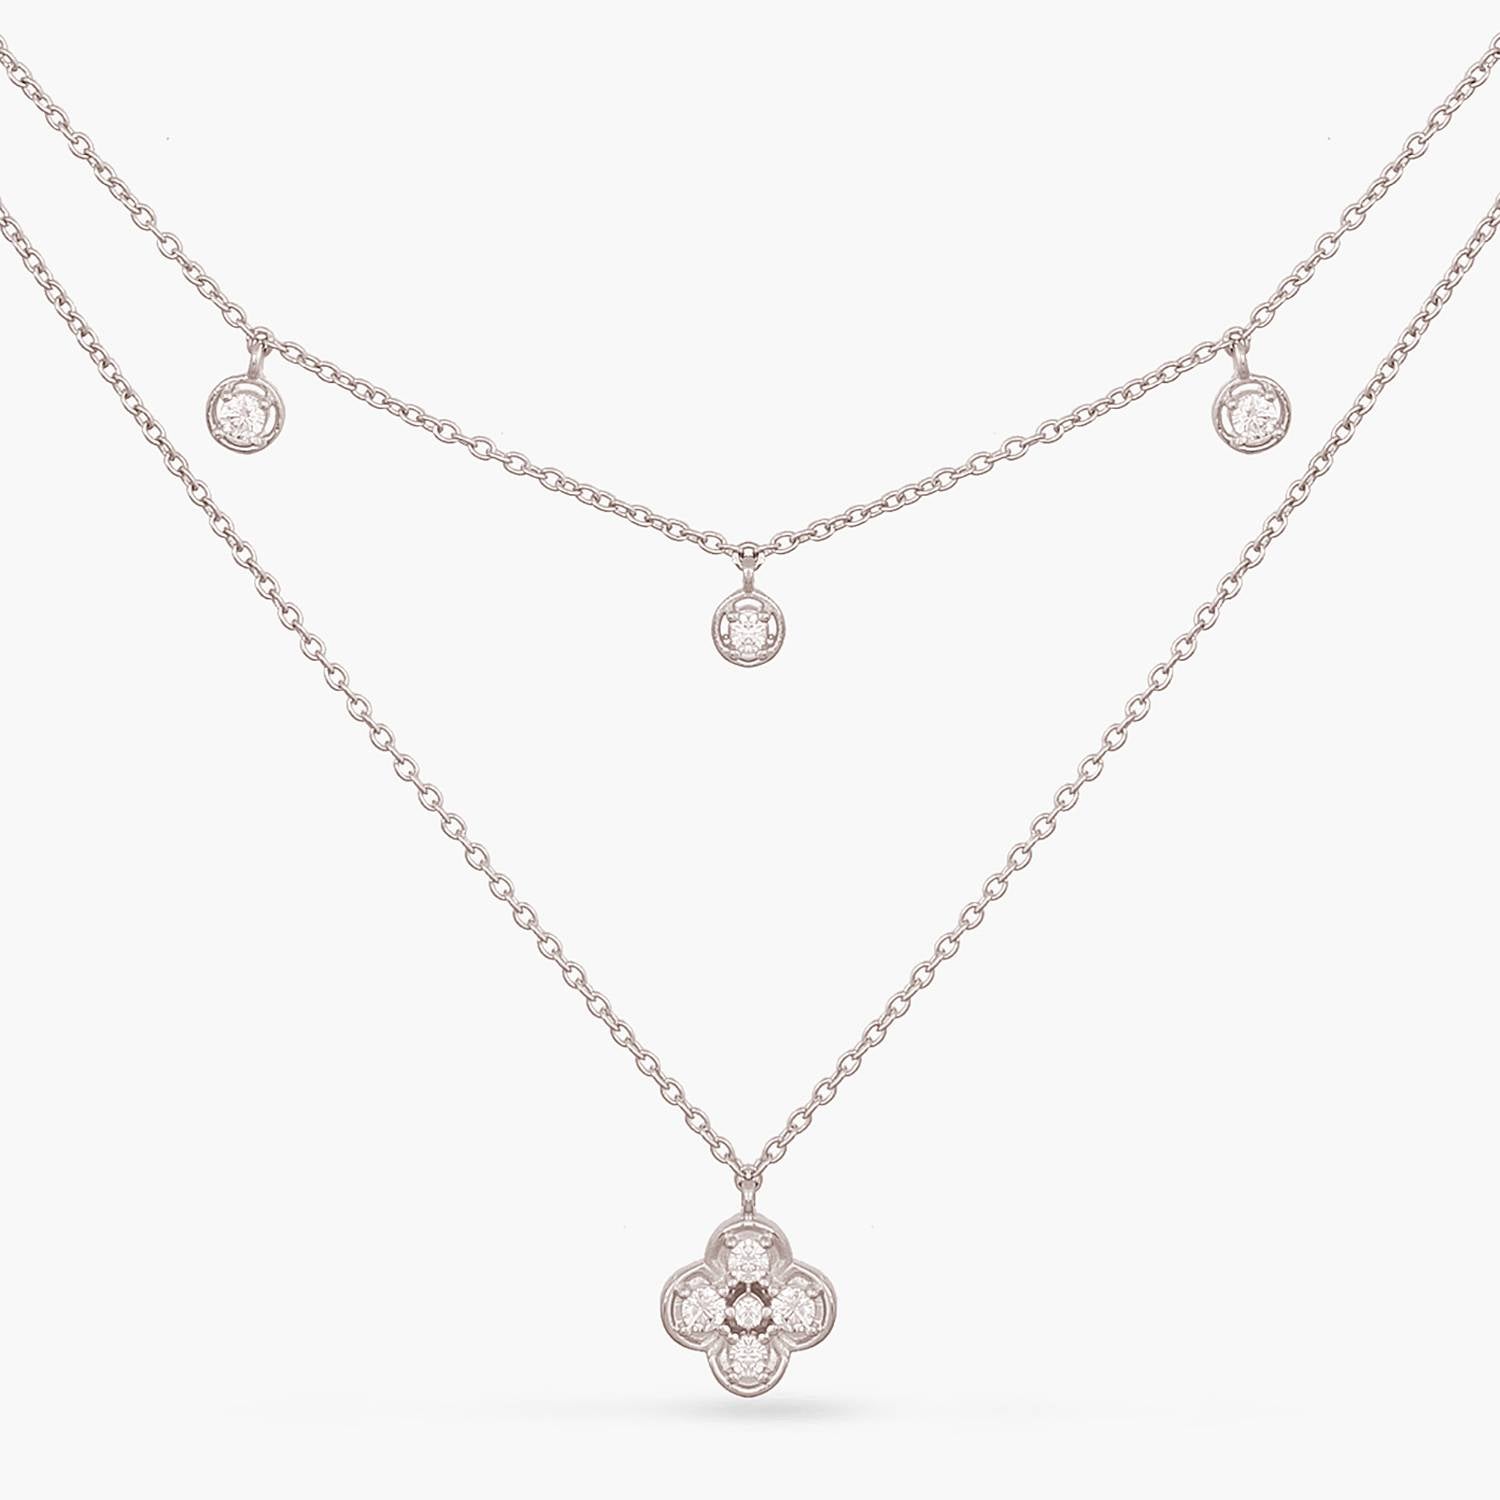 Amazon.com: Dote Dainty Snowflake Pendant Genuine .925 Sterling Silver  Necklace 16-18 Adjustable Chain : Clothing, Shoes & Jewelry